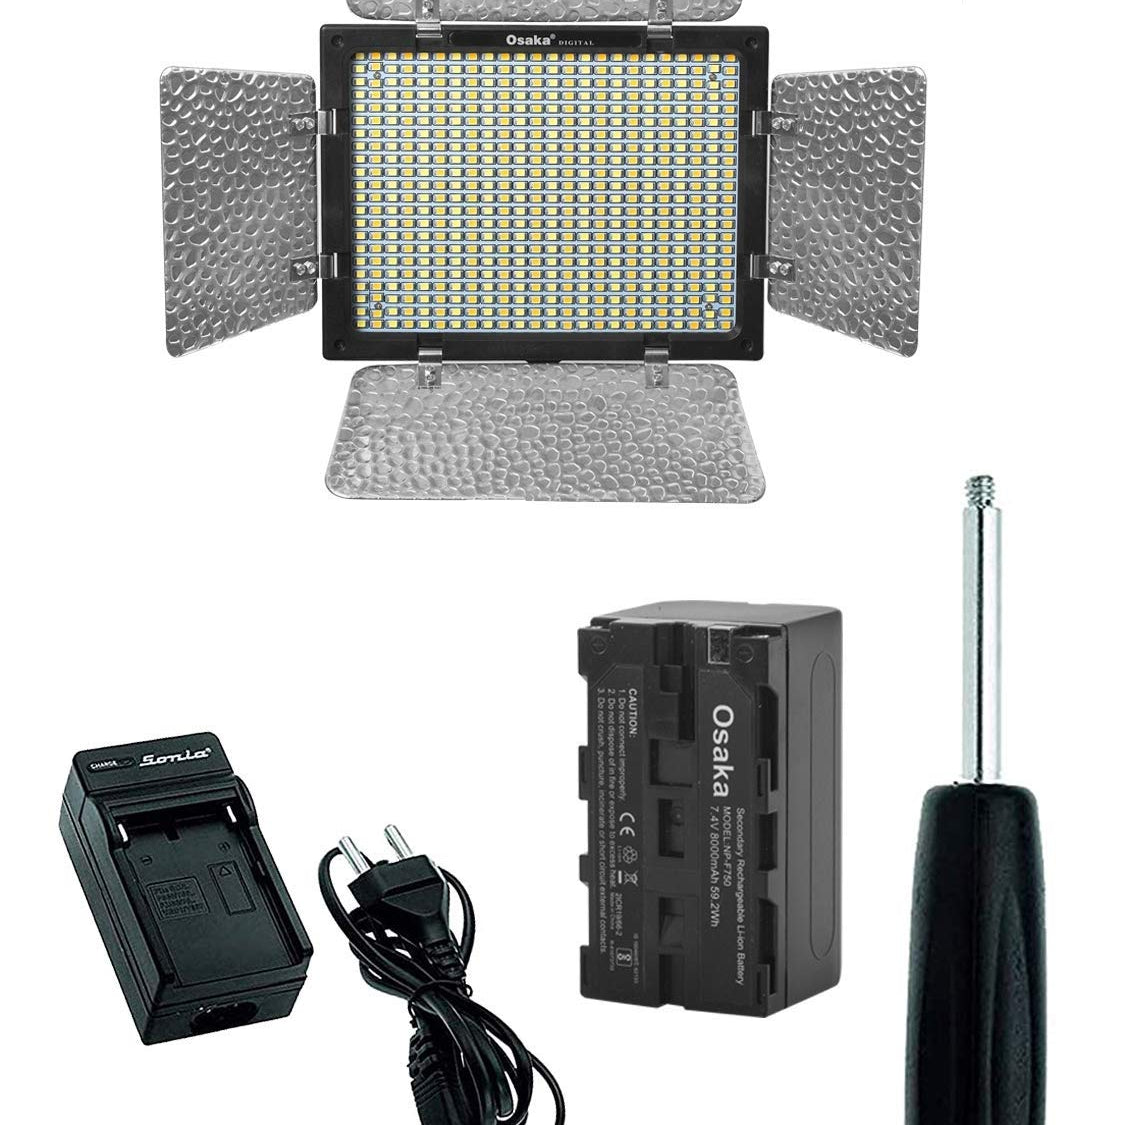 Osaka LED Video Light OS 300 MARK III with Battery and Charger Adapter for Nikon Canon Sony Panasonic DSLR and Video Cameras - The Camerashop